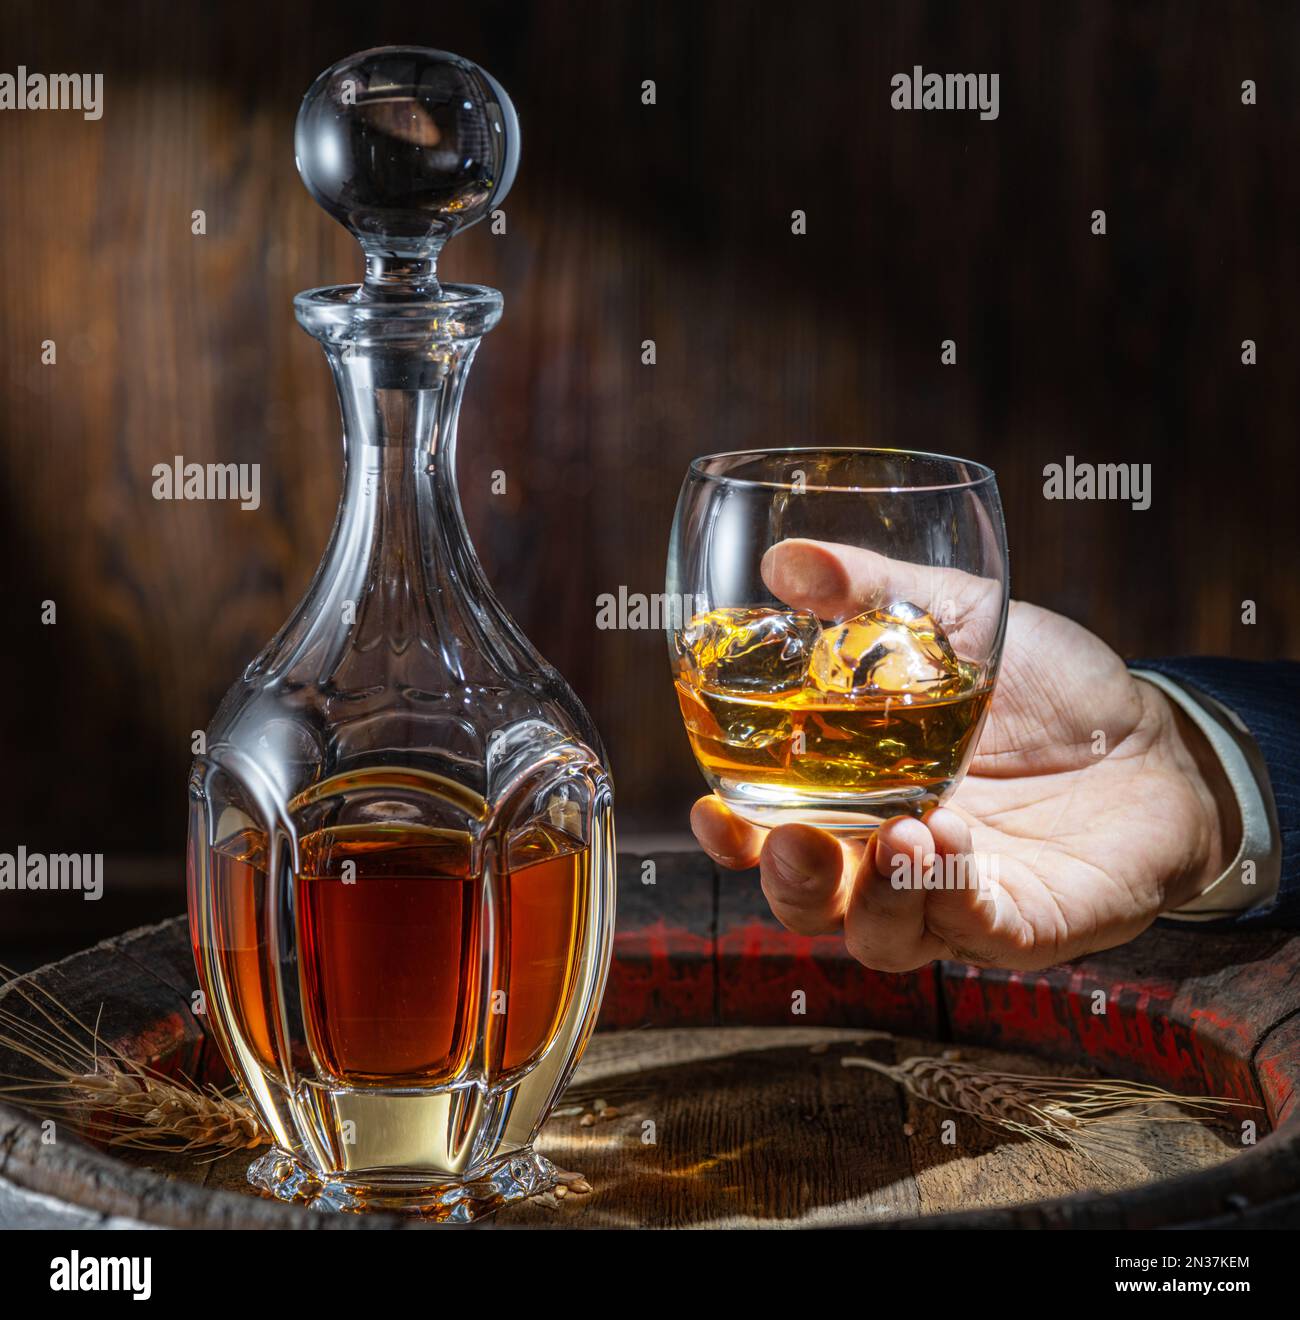 Whisky tasting. Man sits in front of a barrel with a decanter and a glass of whiskey. Stock Photo